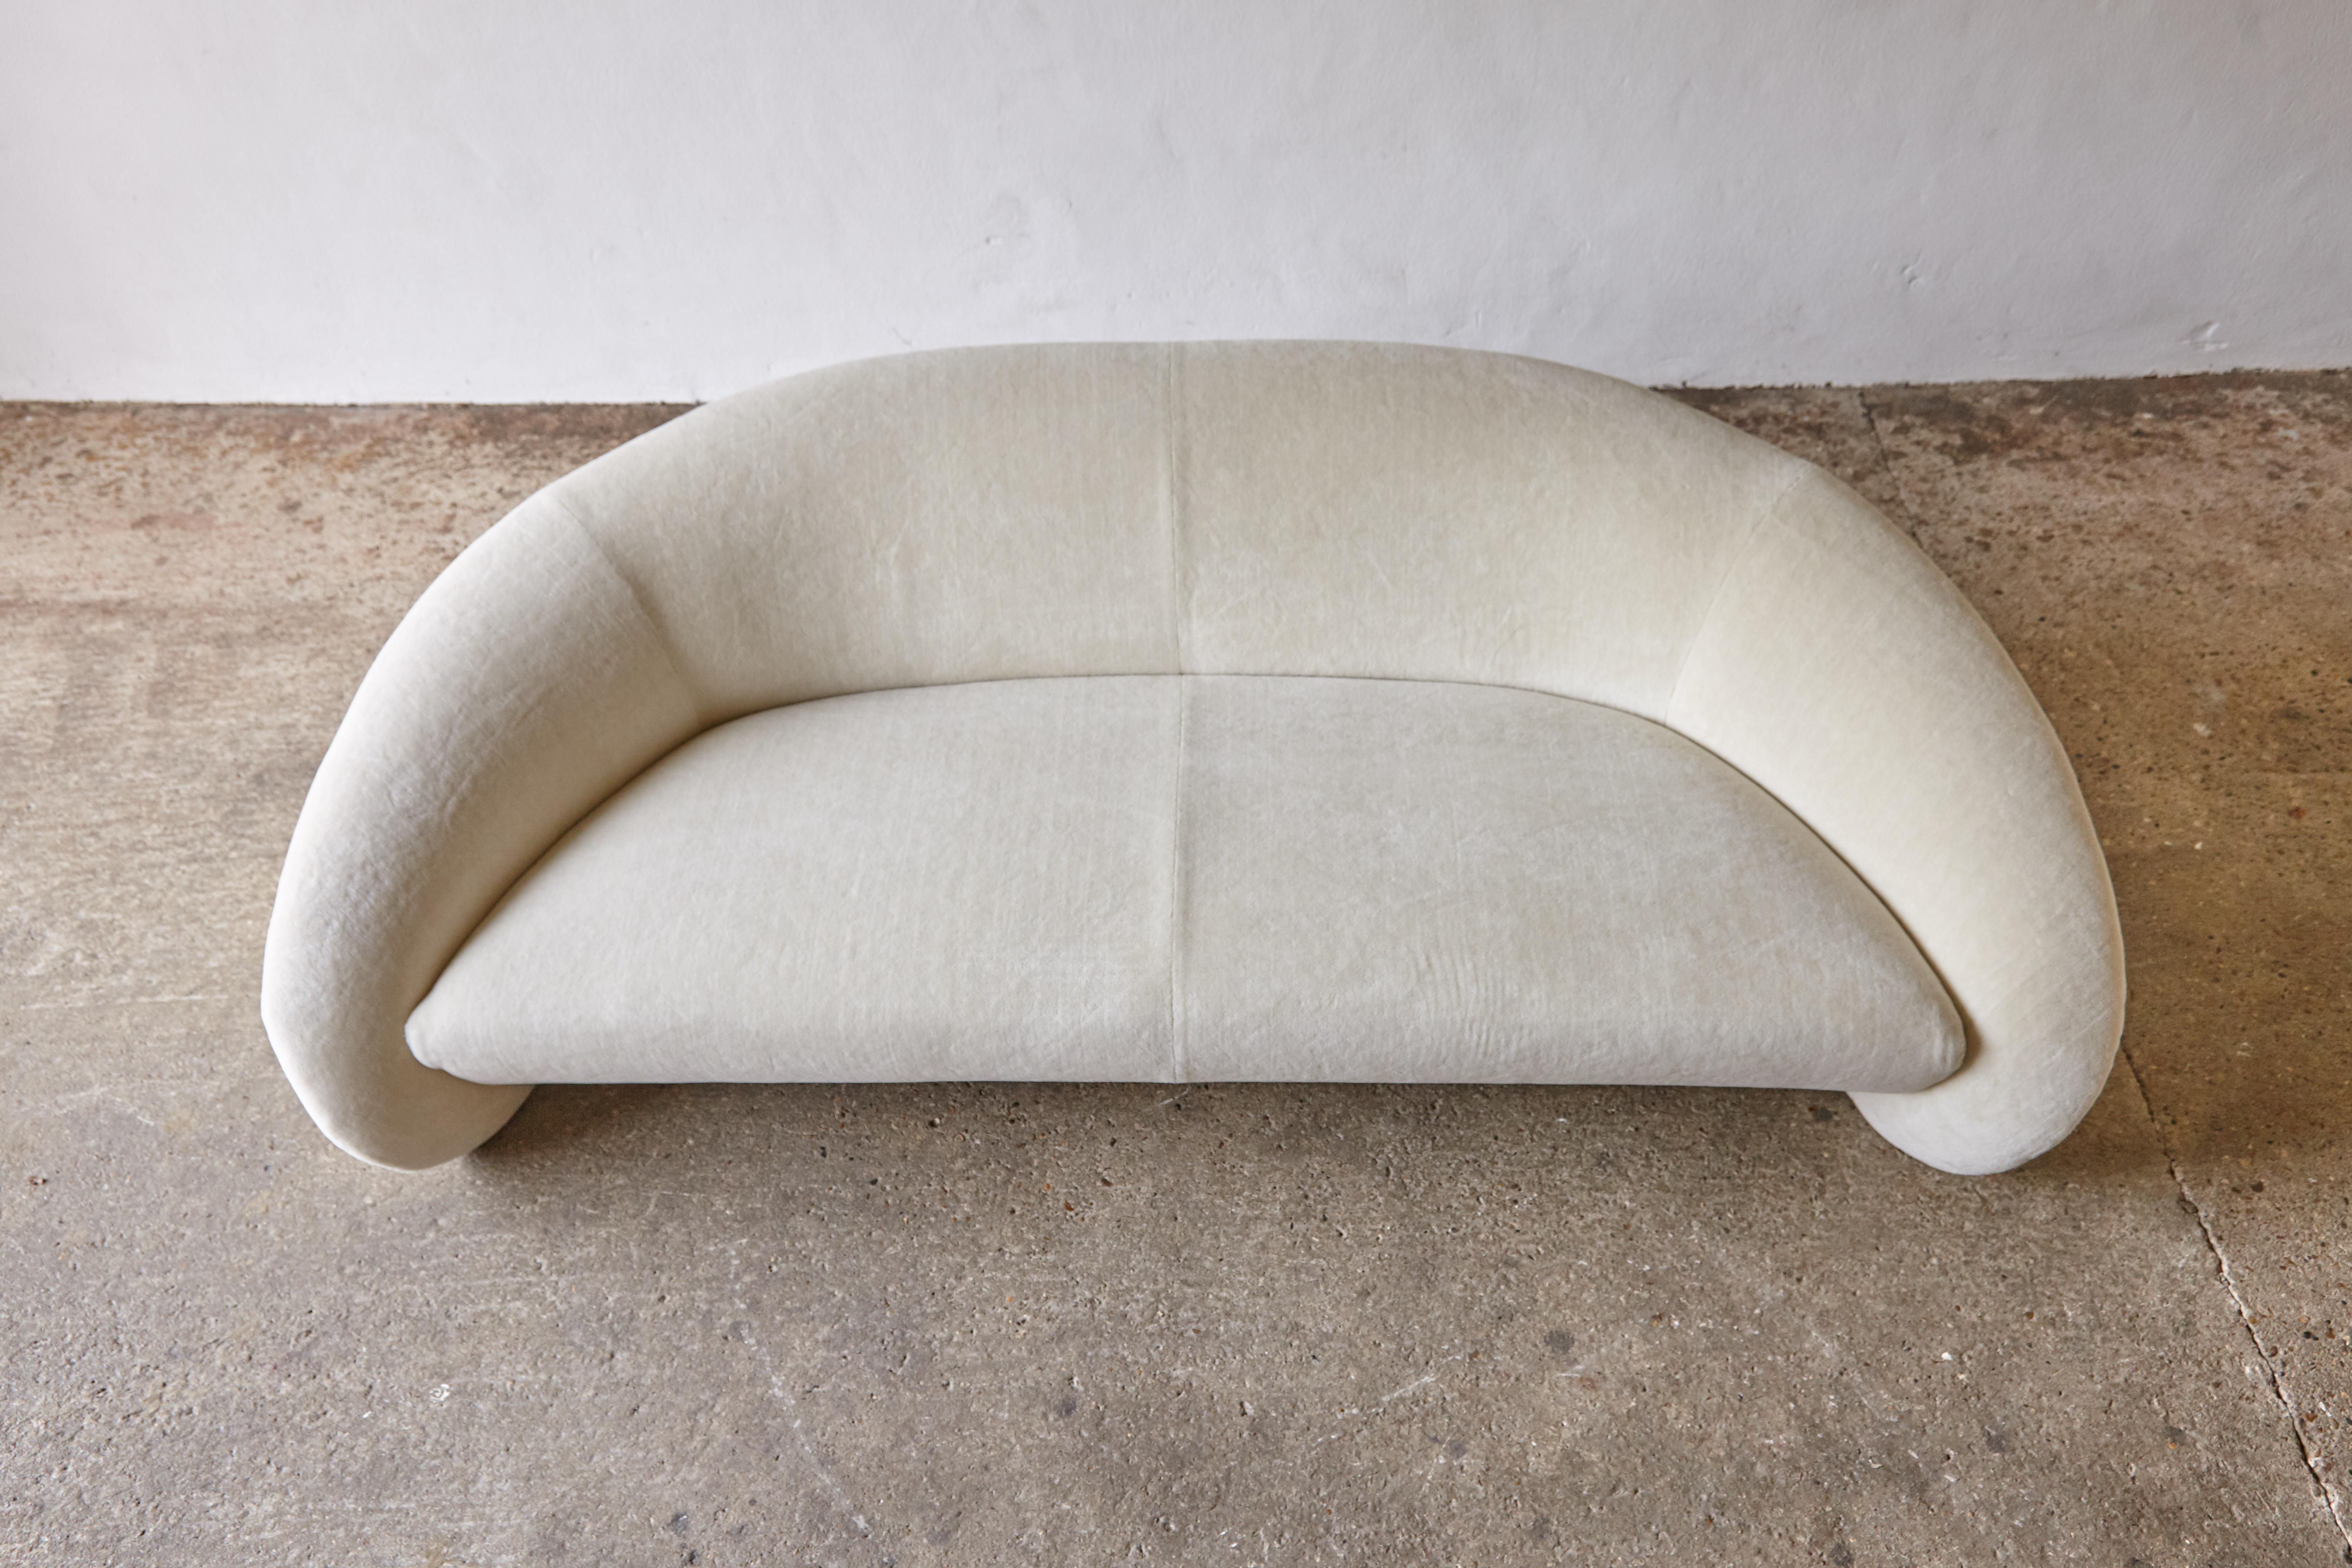 Superb Curved Italian Sofa, Newly Upholstered in Alplaca, Late 1970s-Early 1980s 13